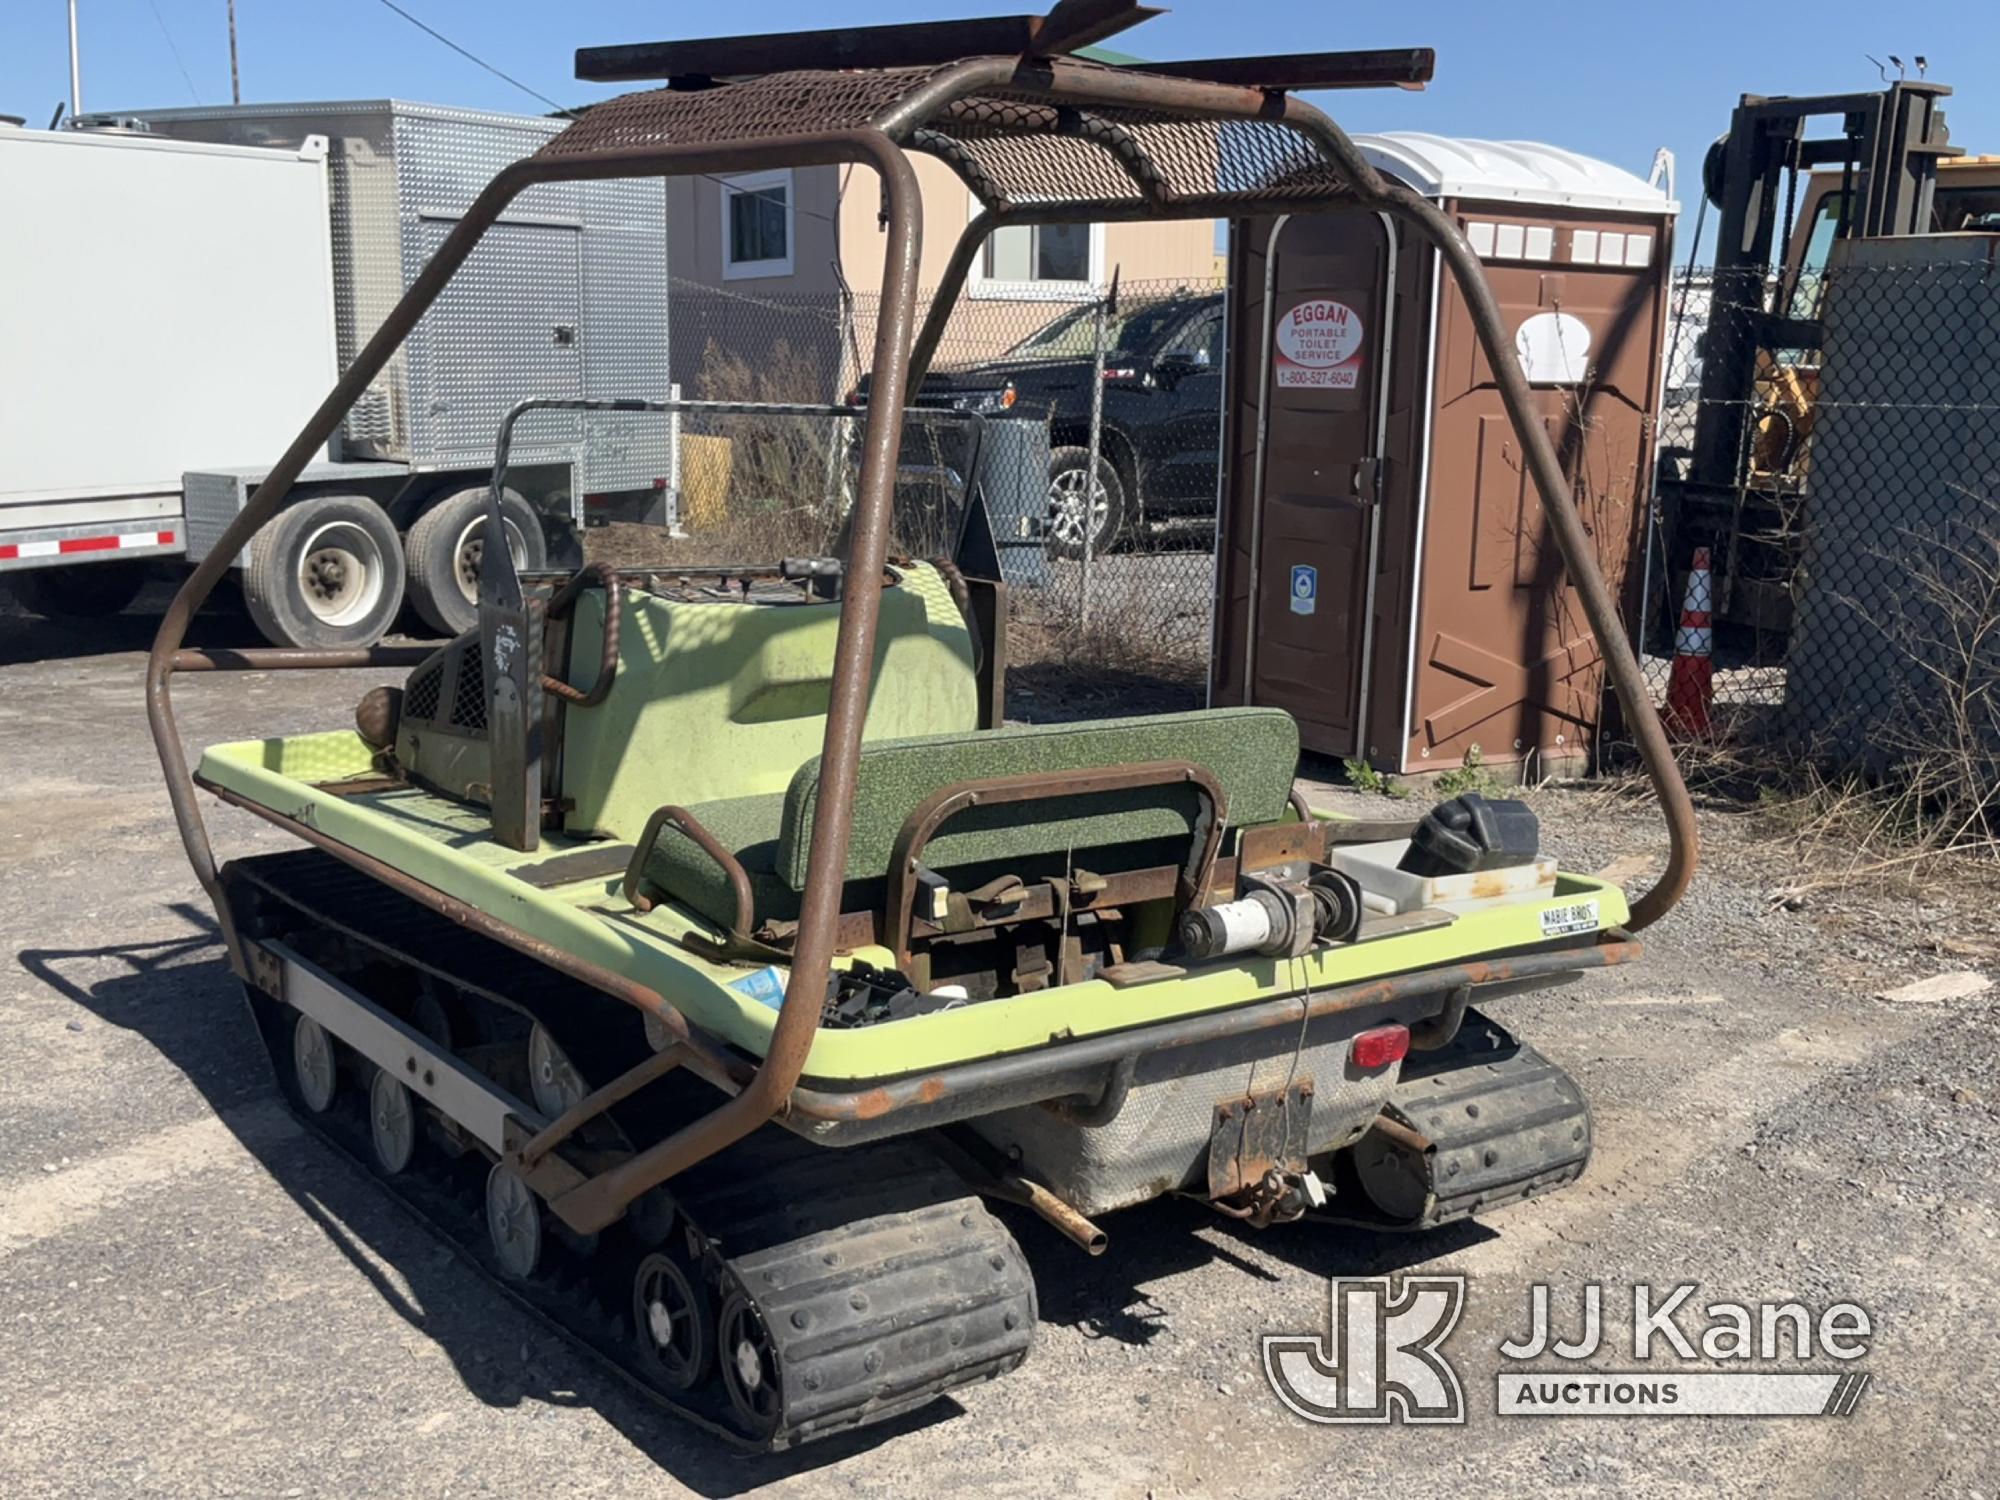 (Rome, NY) Cushman Trackster Crawler ATV Not Running, Condition Unknown